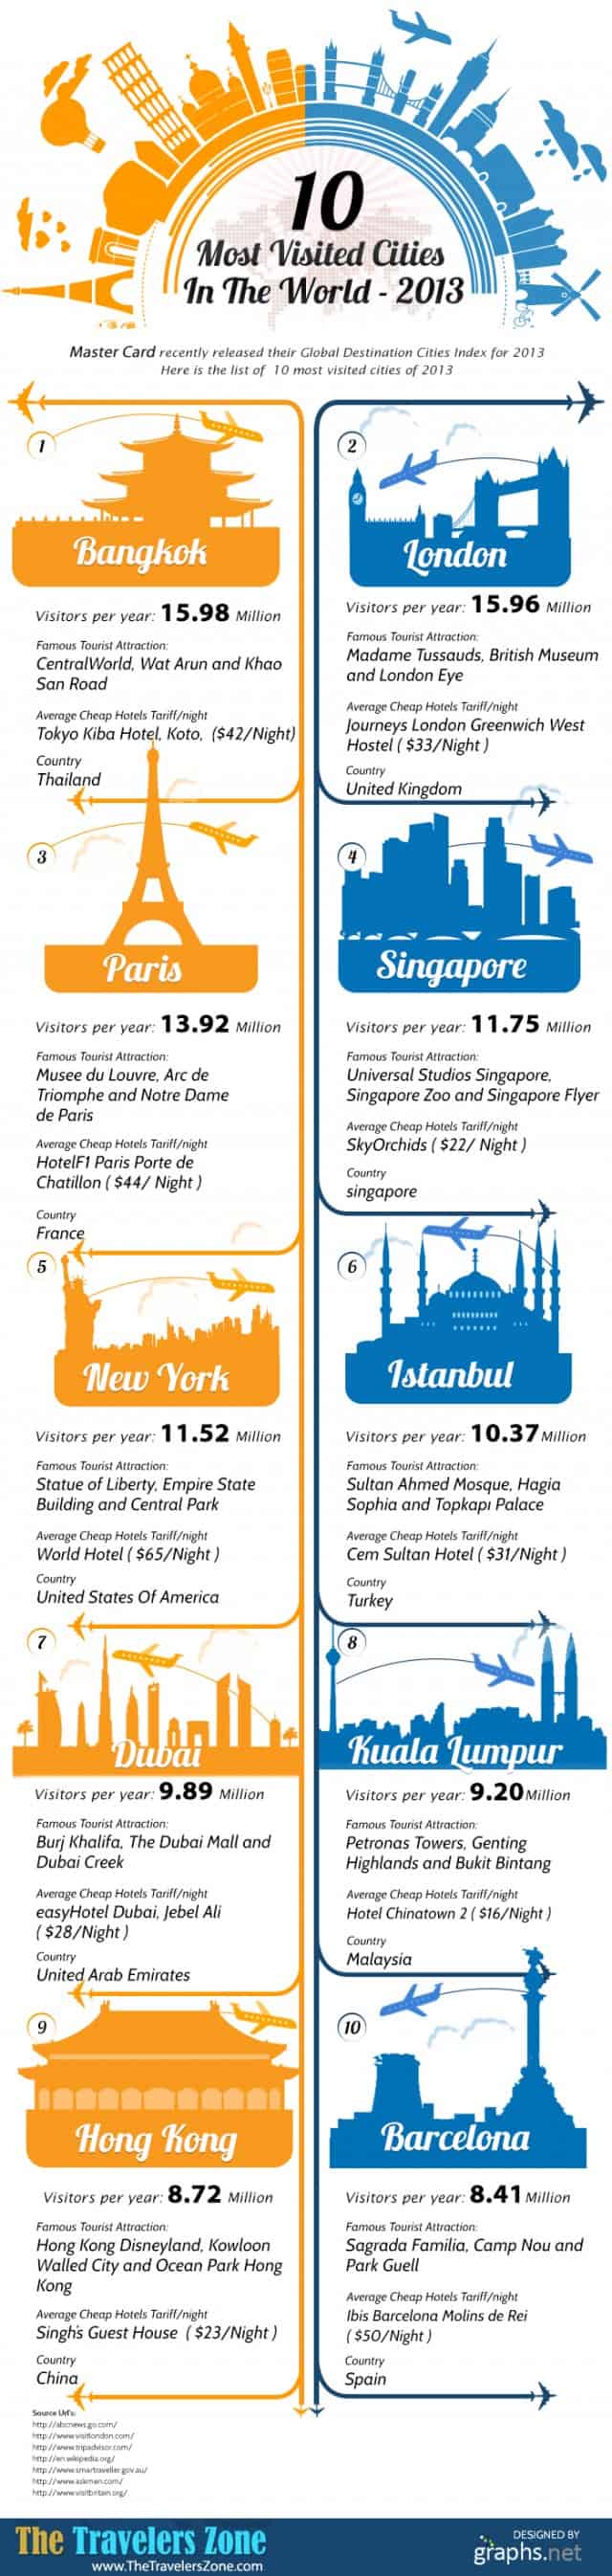 10 Most Visited Cities in the World Infographic